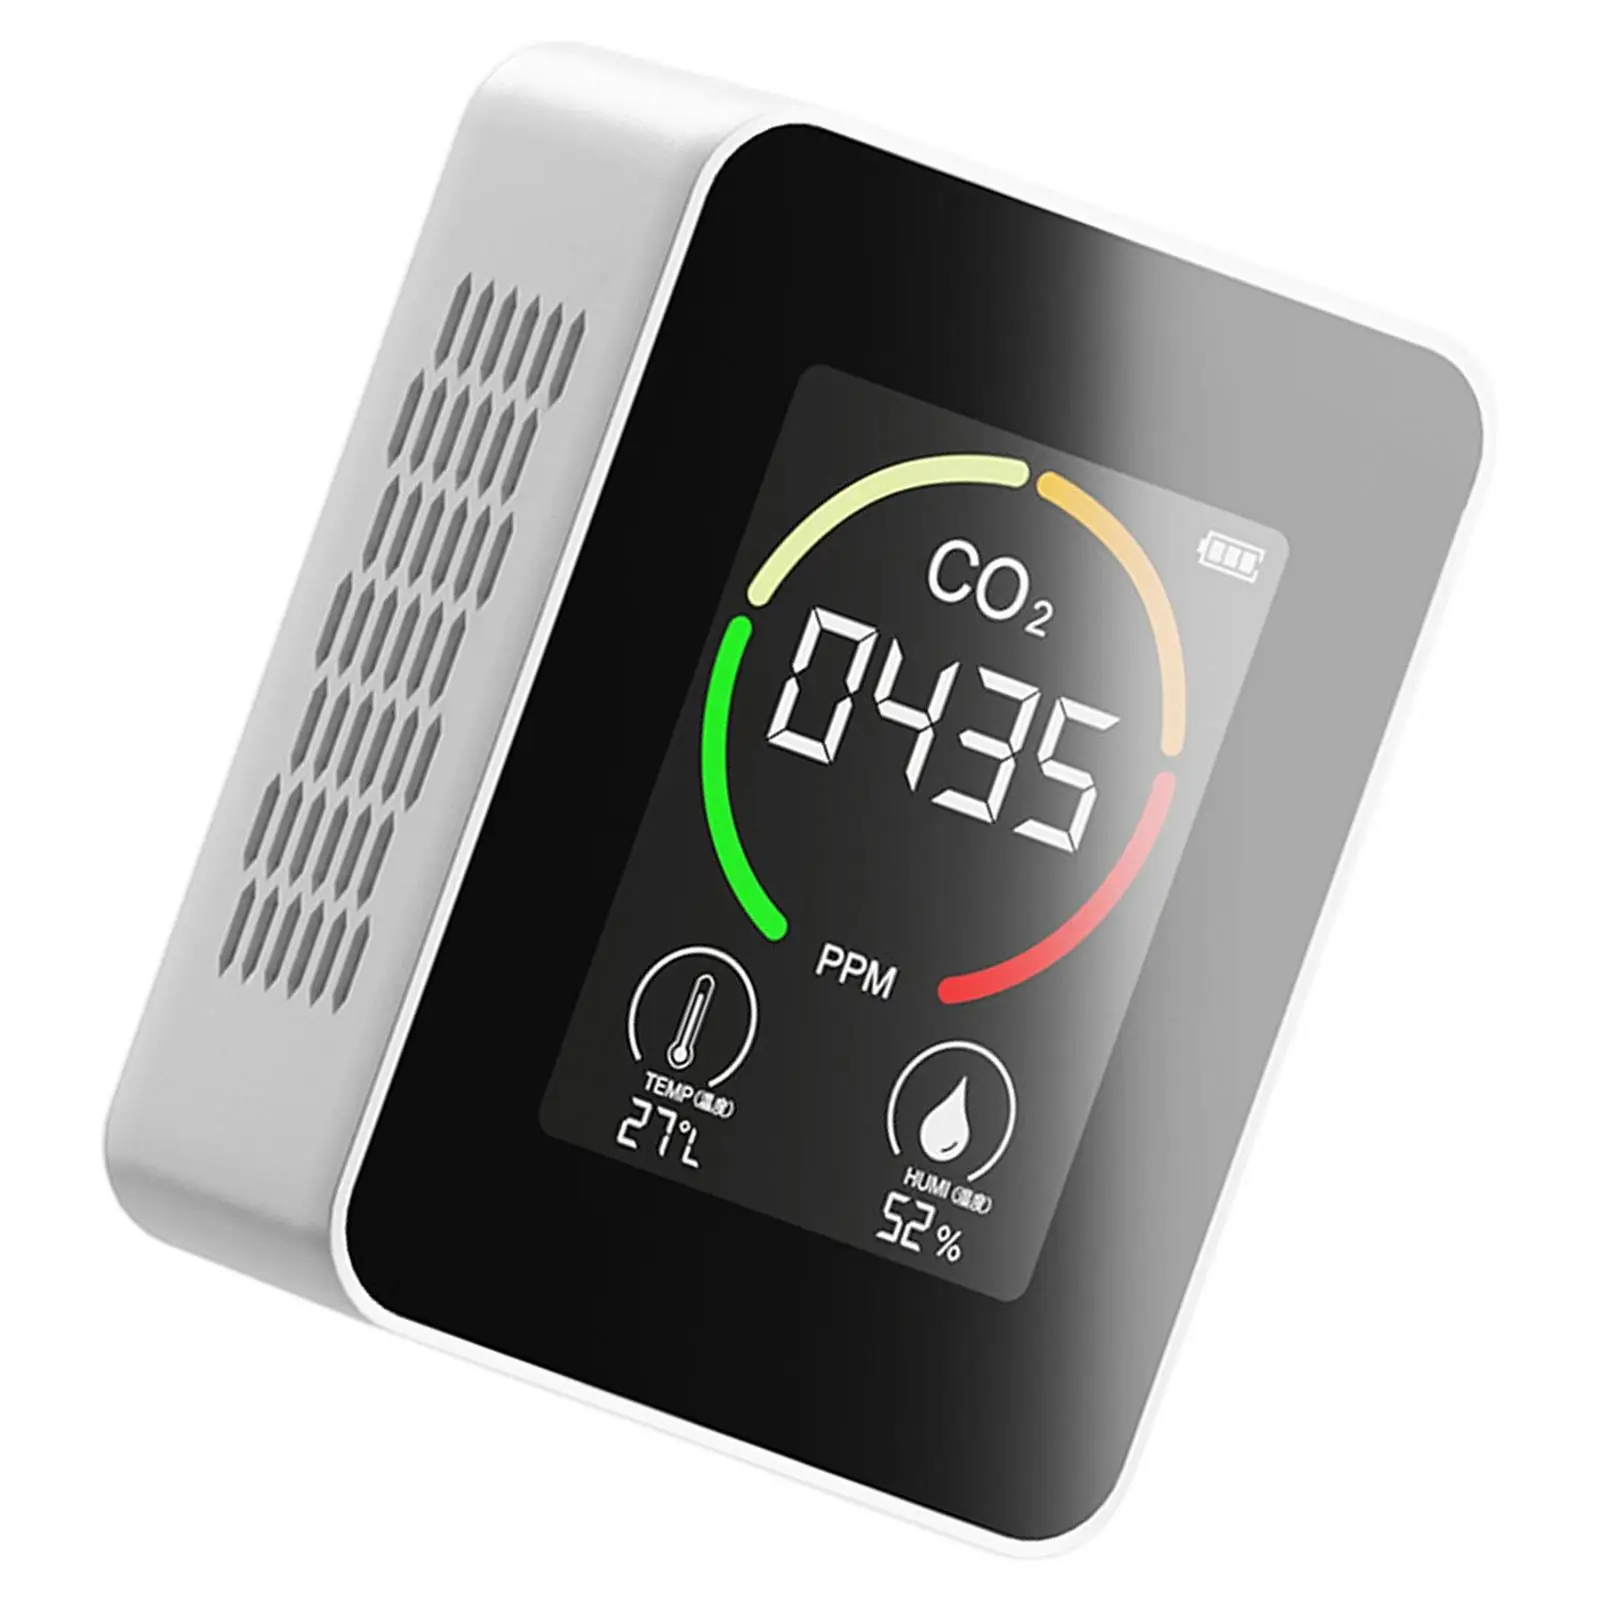 Carbon Dioxide 400-5000ppm Range Air Quality Monitor for Room